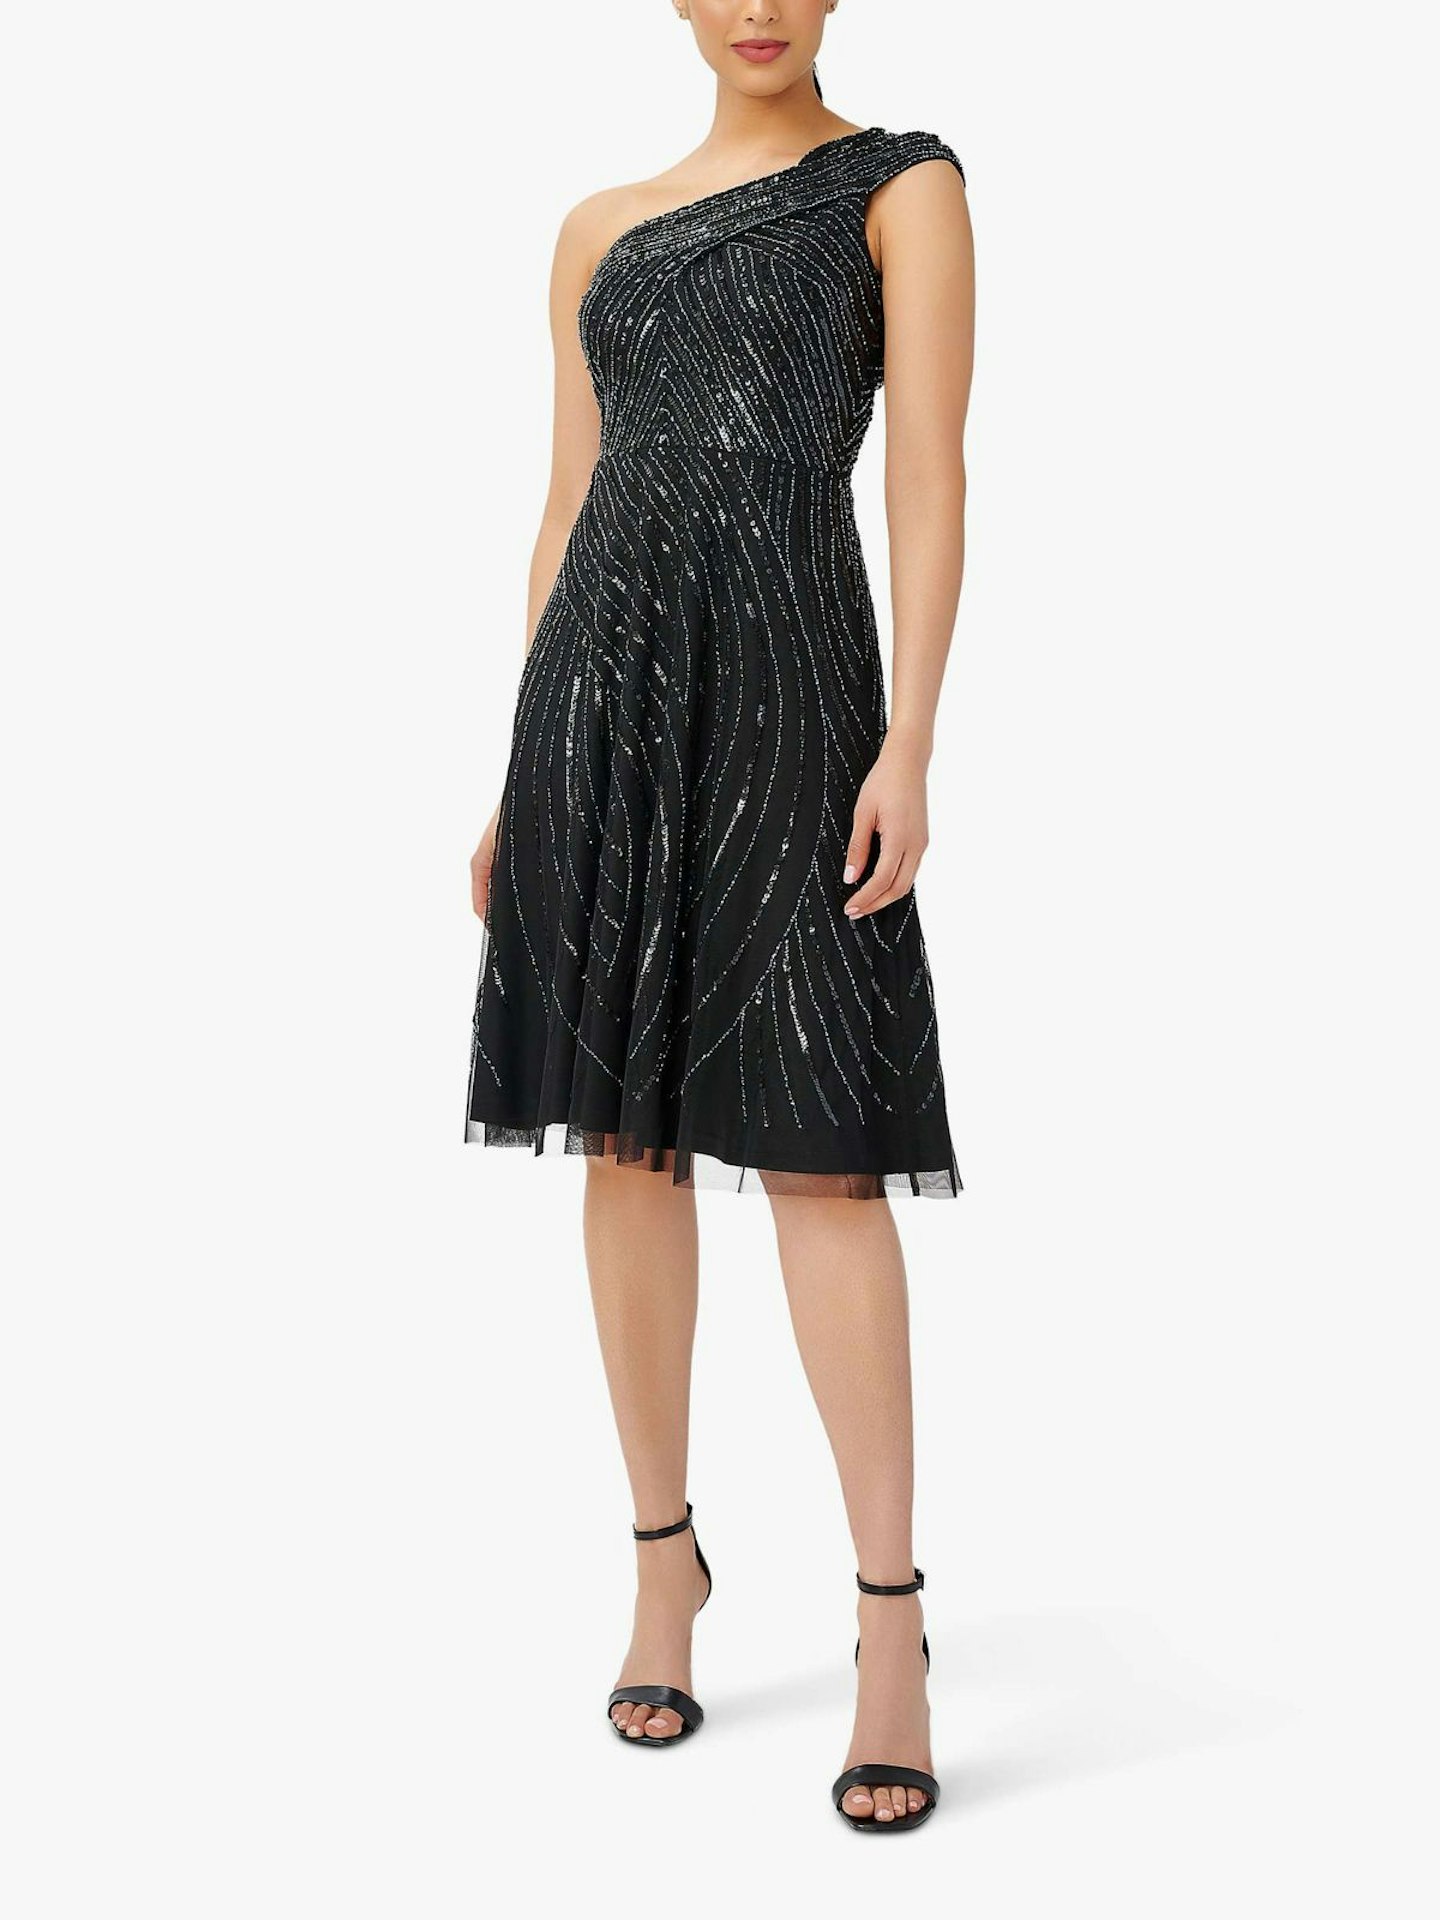 Adrianna Papell Beaded One Shoulder Dress